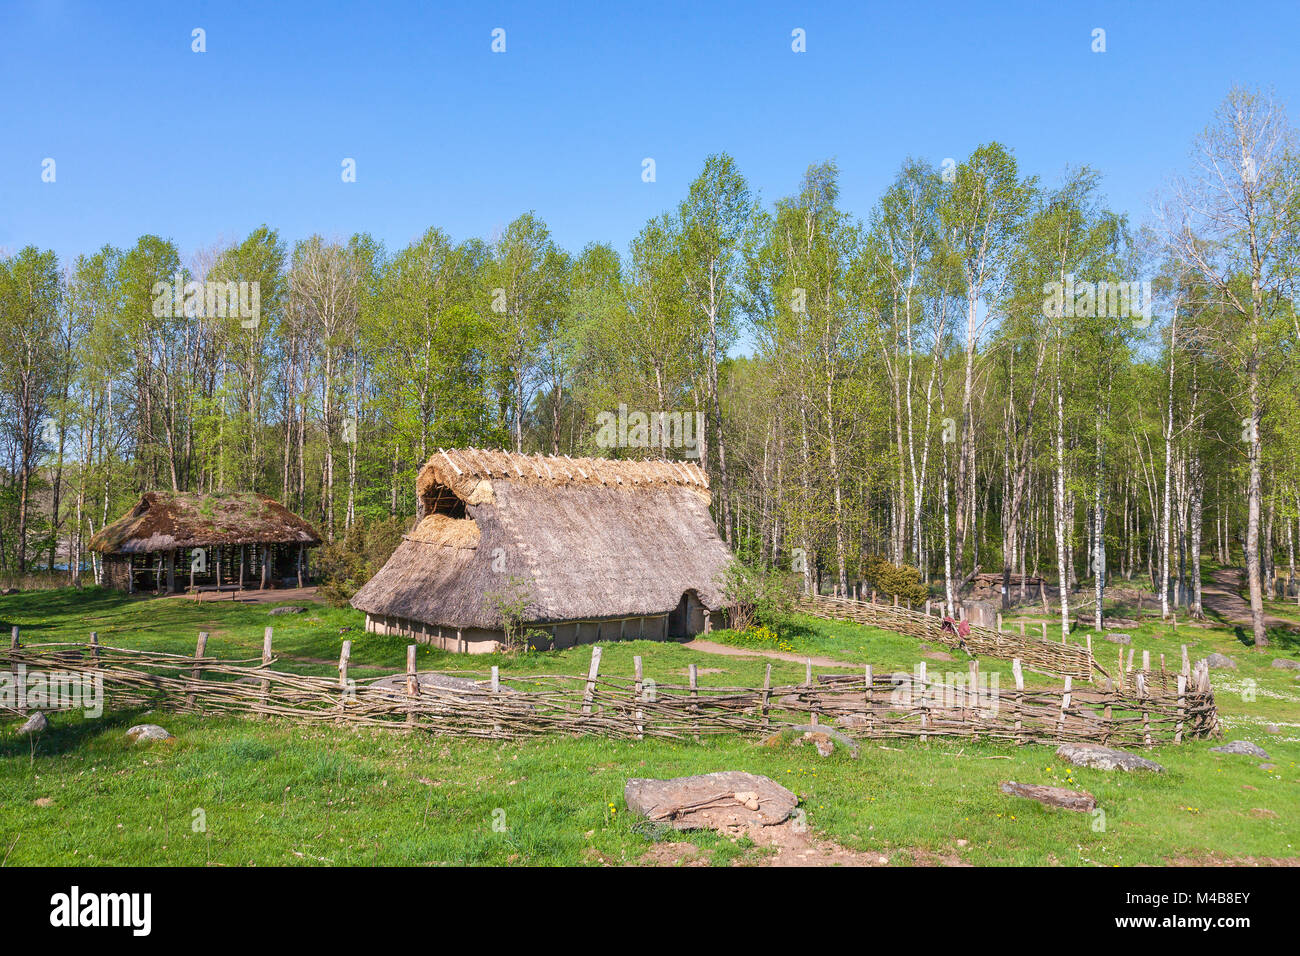 Bronze Age's hut at a forest Stock Photo